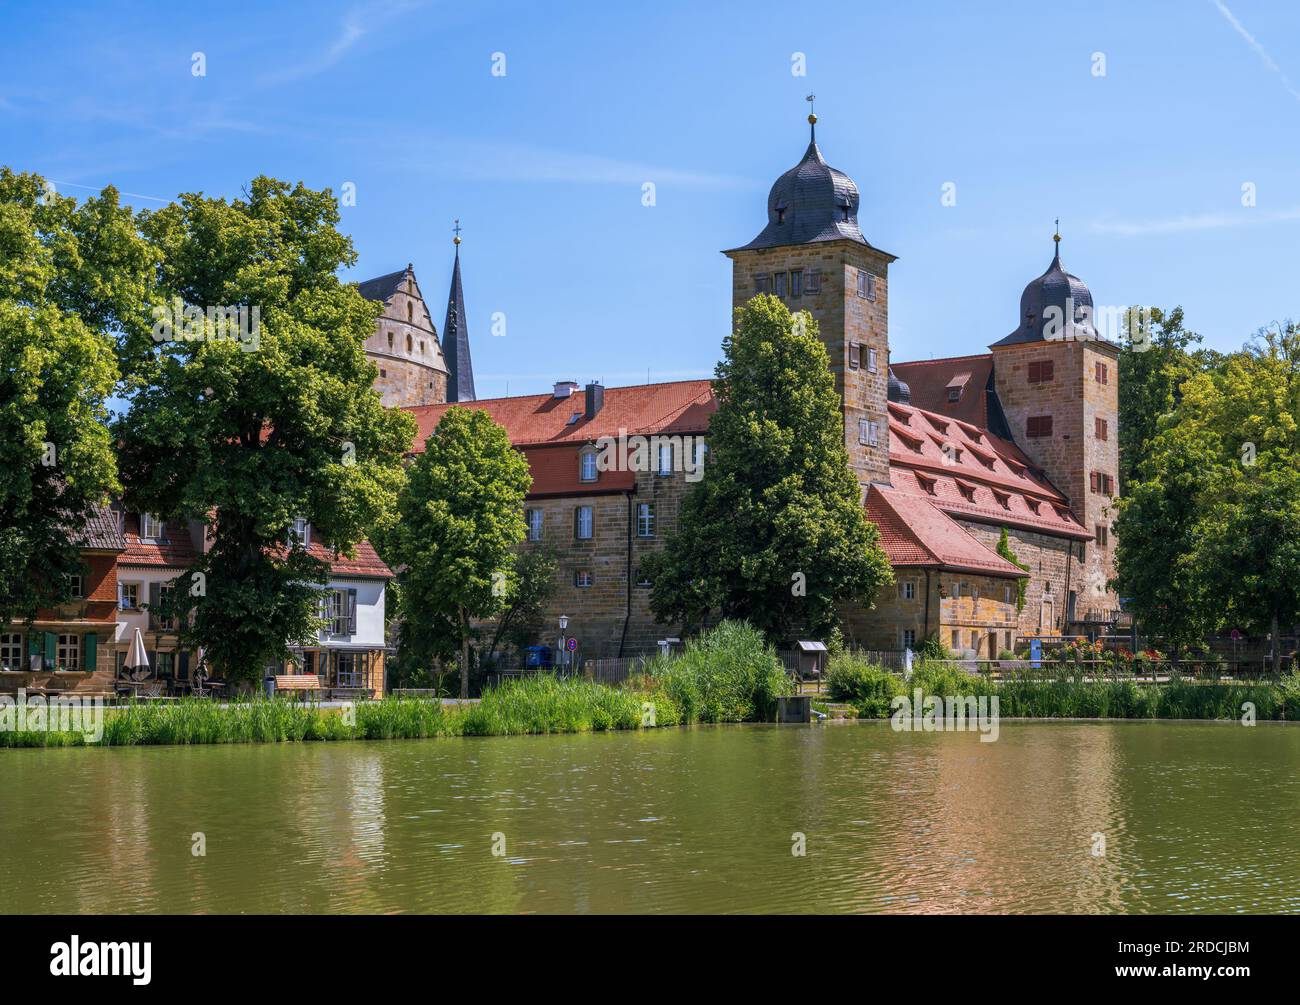 THURNAU, GERMANY - JUNE 26: The historic castle of Thurnau, Germany on June 26, 2023 Stock Photo